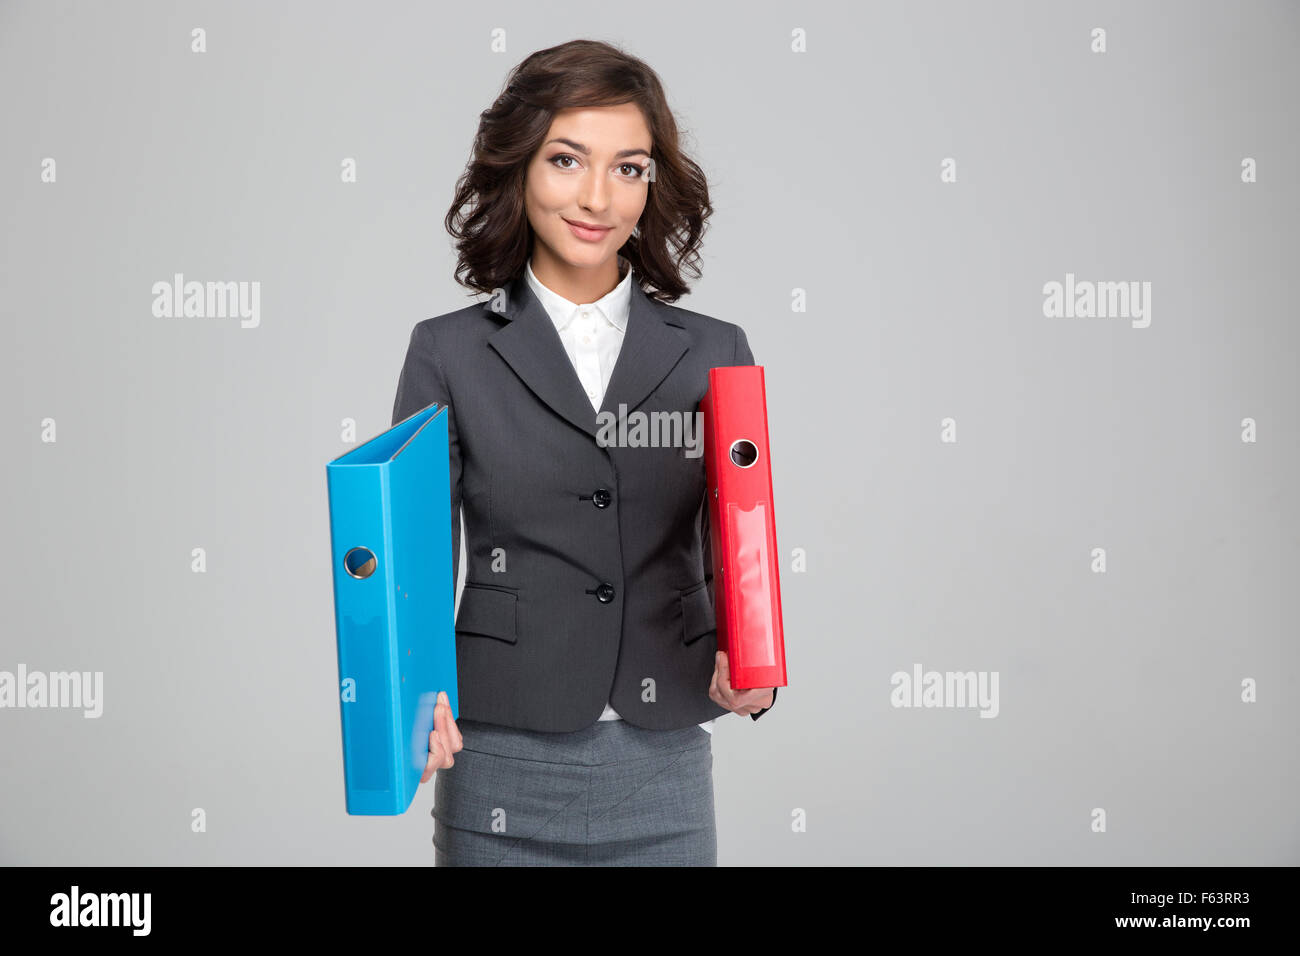 Beautiful young curly happy woman in gray suit holding red and blue binders Stock Photo